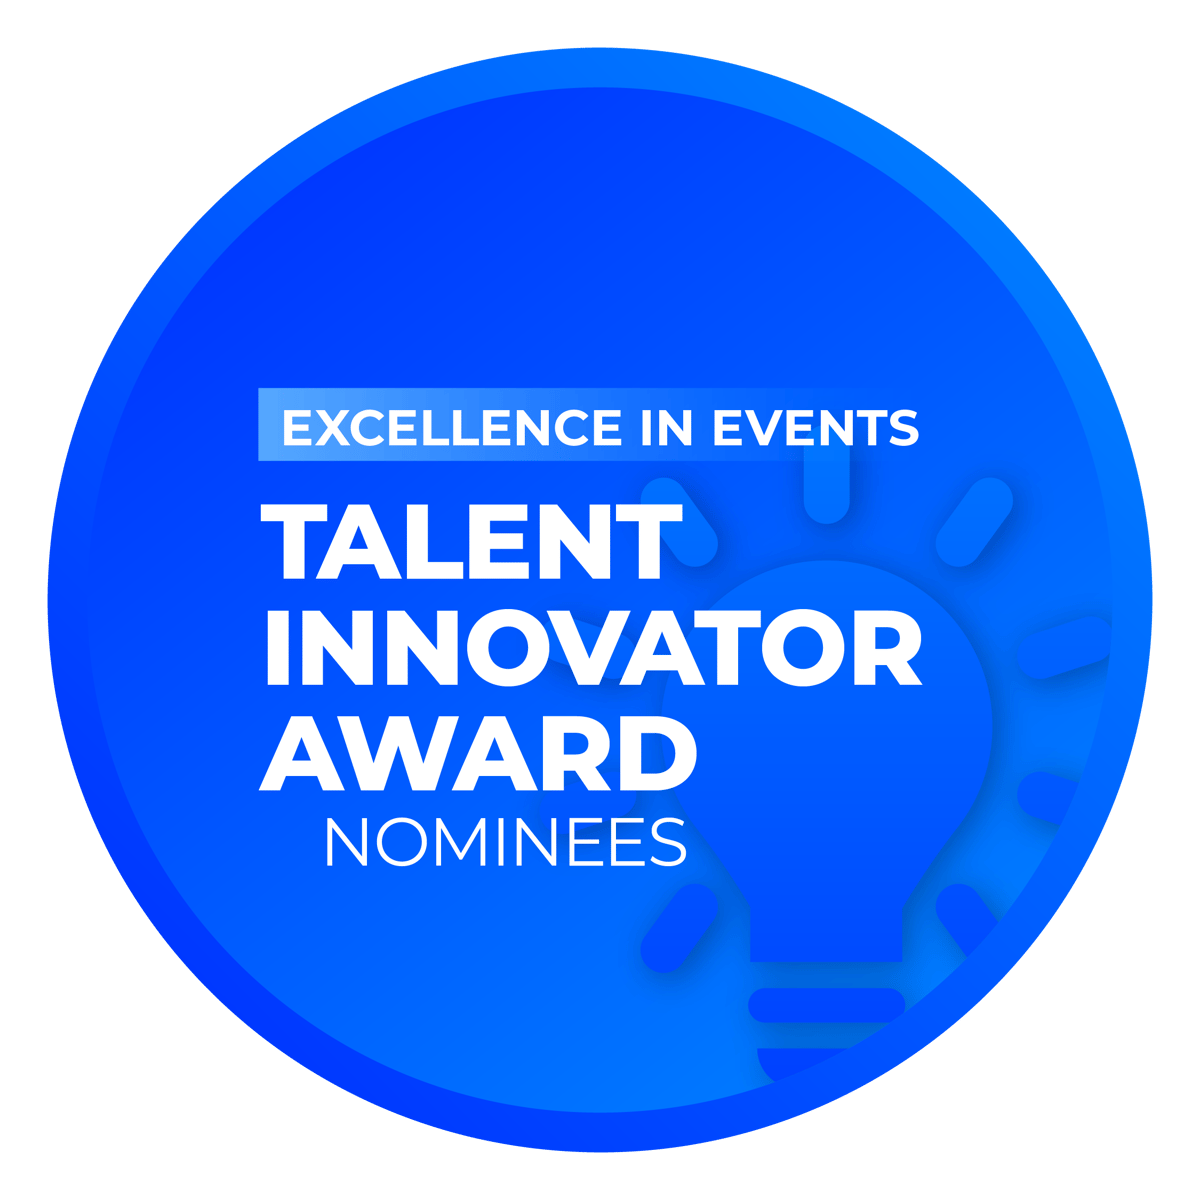 Talent Innovator Award: Excellence in Events Nominees